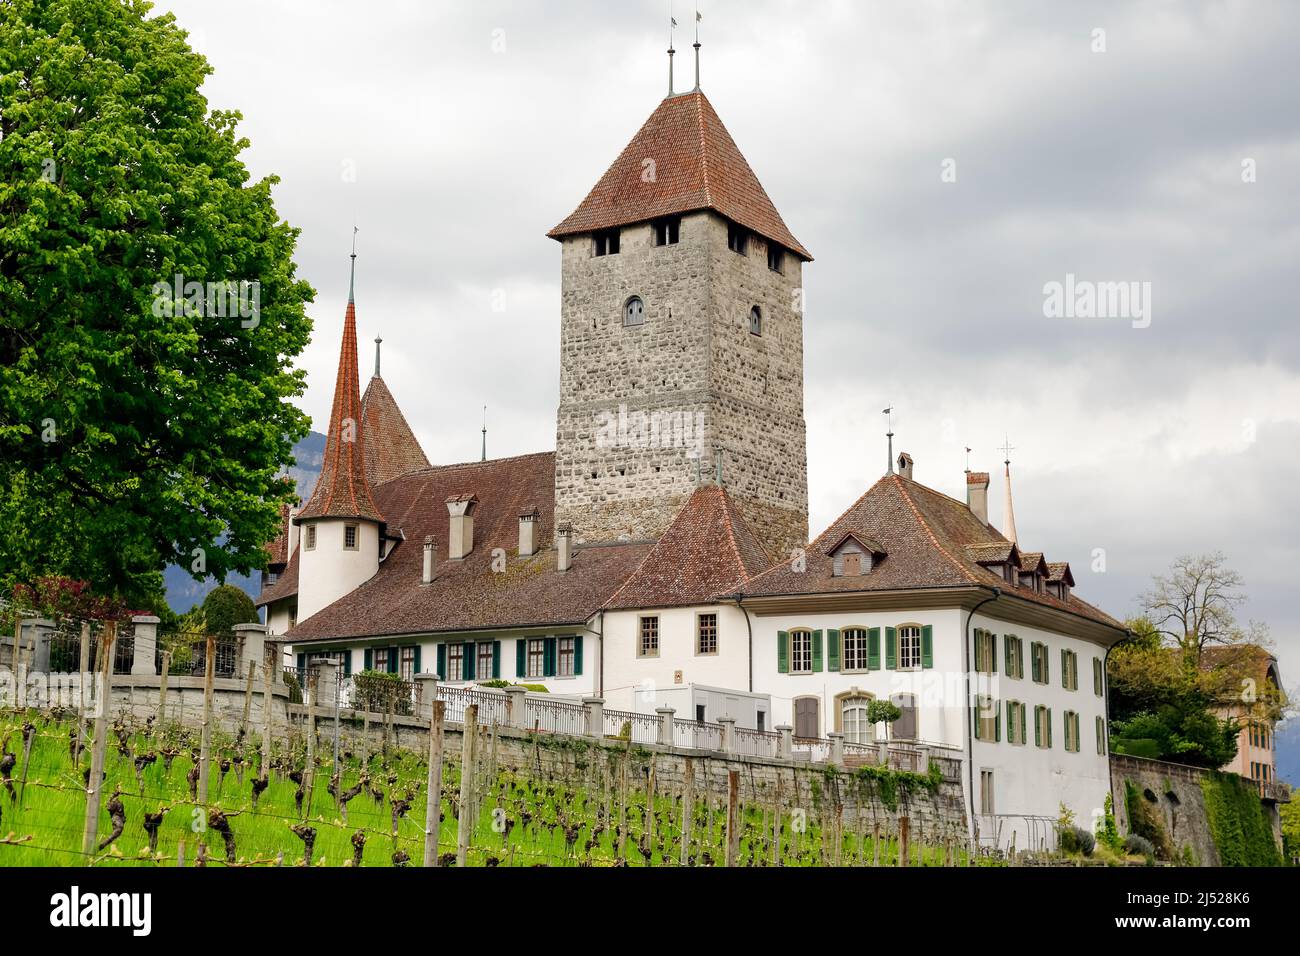 Spiez, Switzerland - 17 April 2017: Spiez Castle can be seen on a hill against a cloudy sky. This Swiss heritage site is in the municipality of Spiez Stock Photo